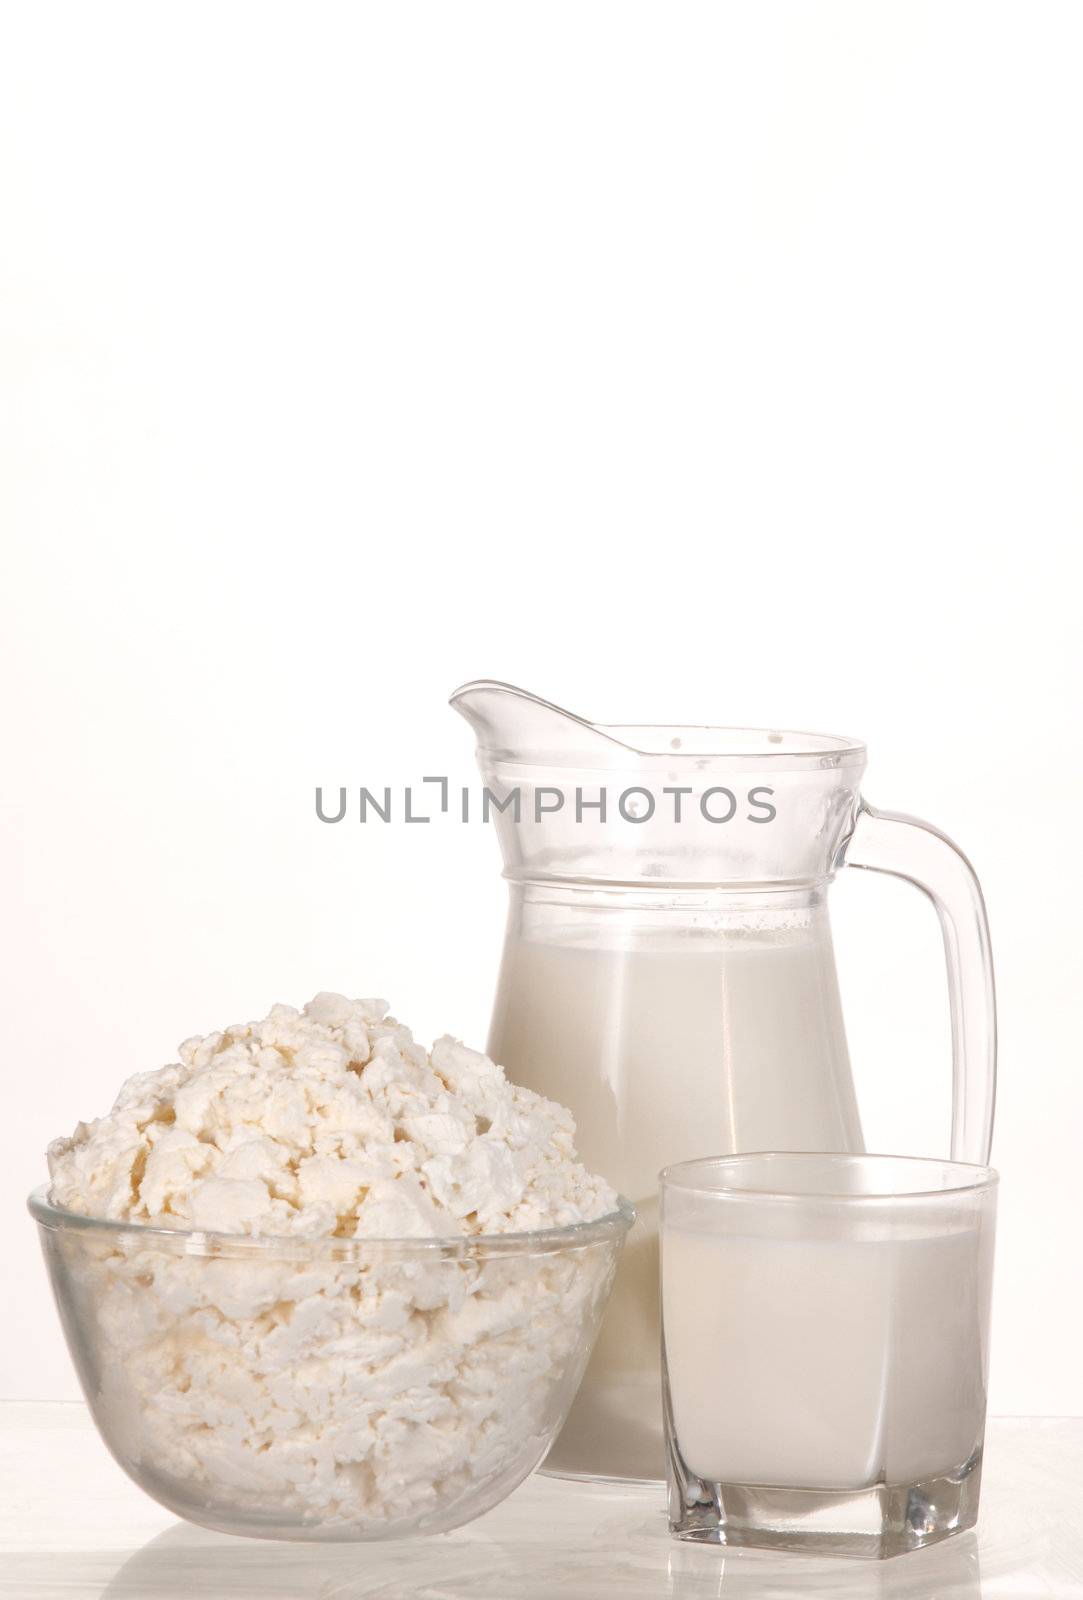 dish with cottage cheese and glass with milk